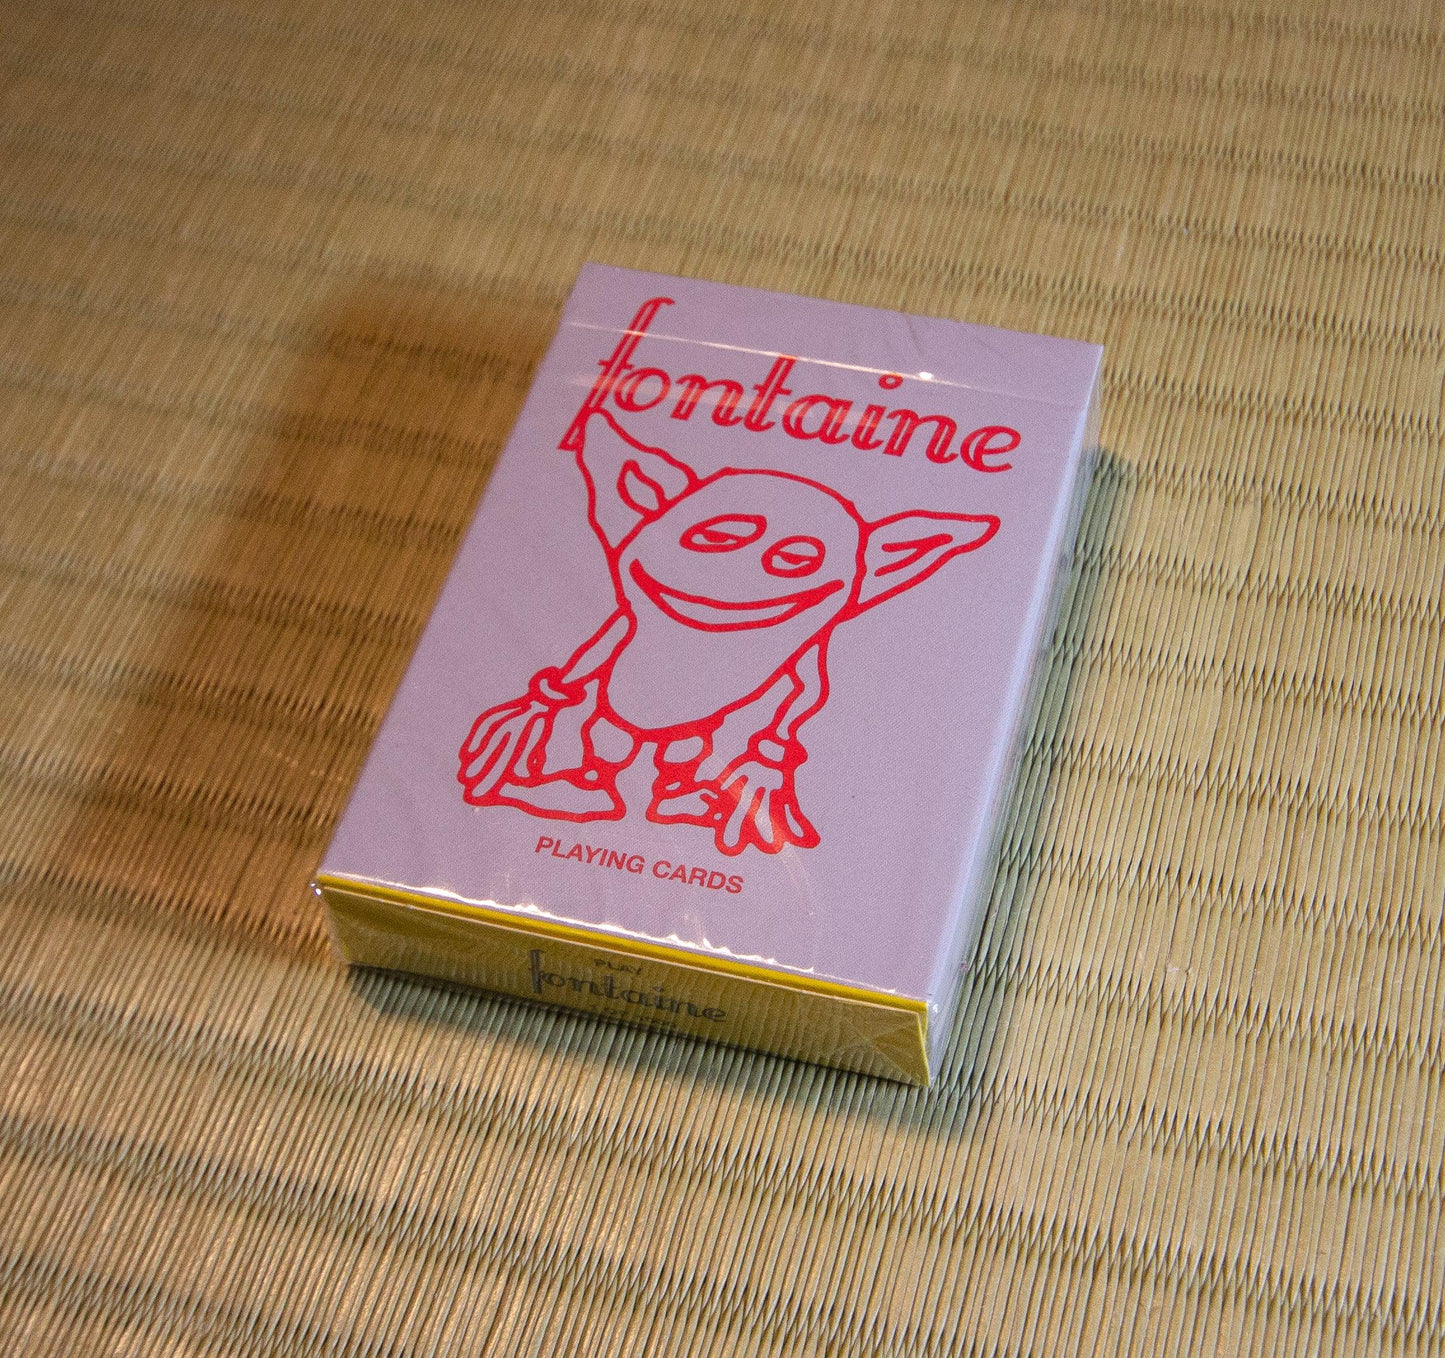 Play Fontaine Playing Cards by Fontaine Cards - Deckita Decks